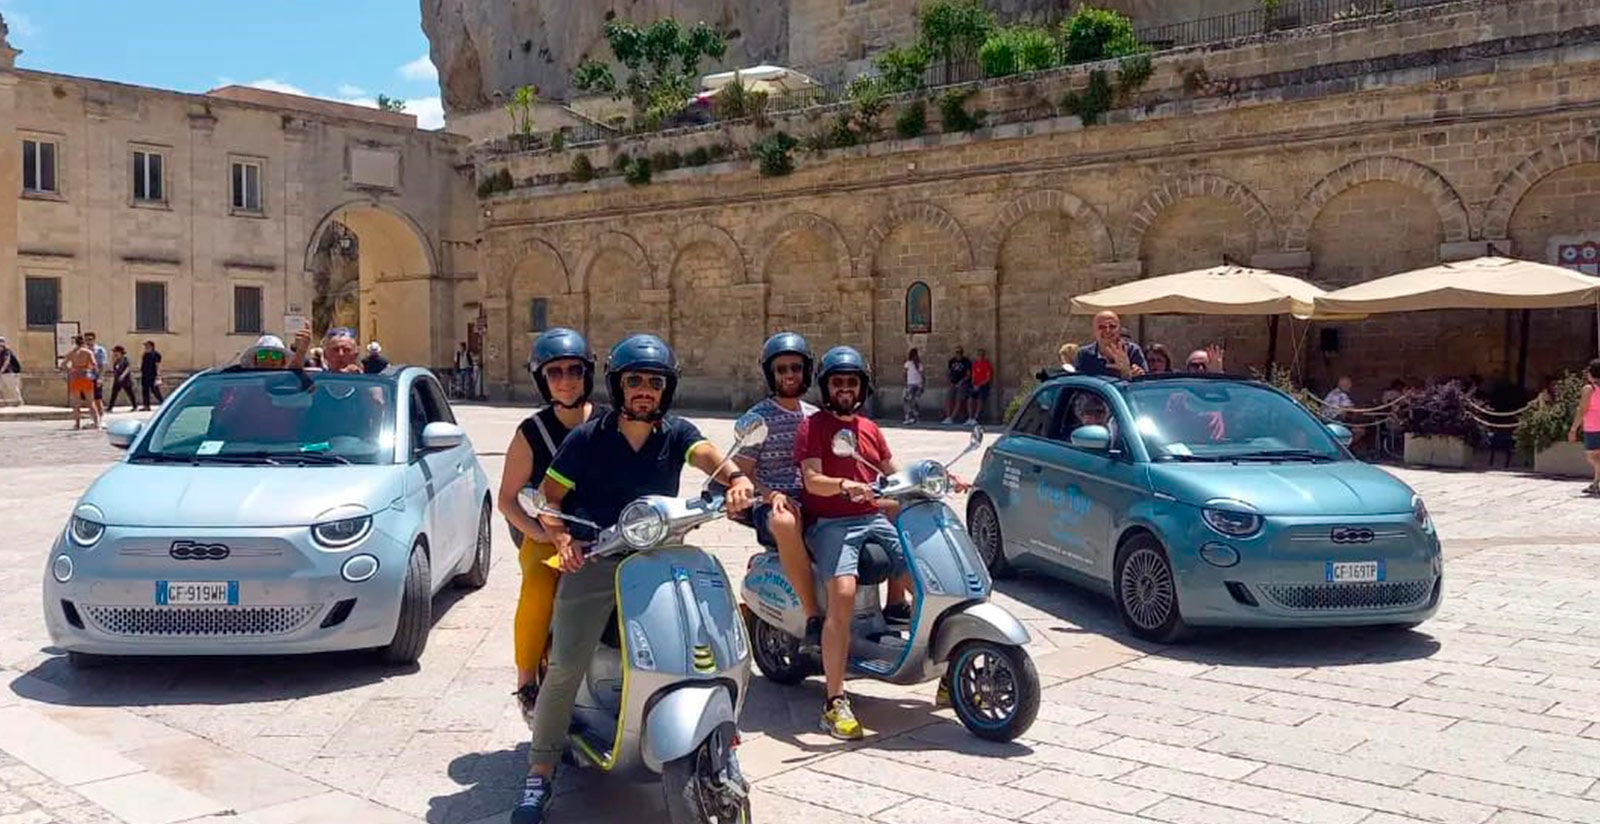 Green tour by car or electric Vespa 31